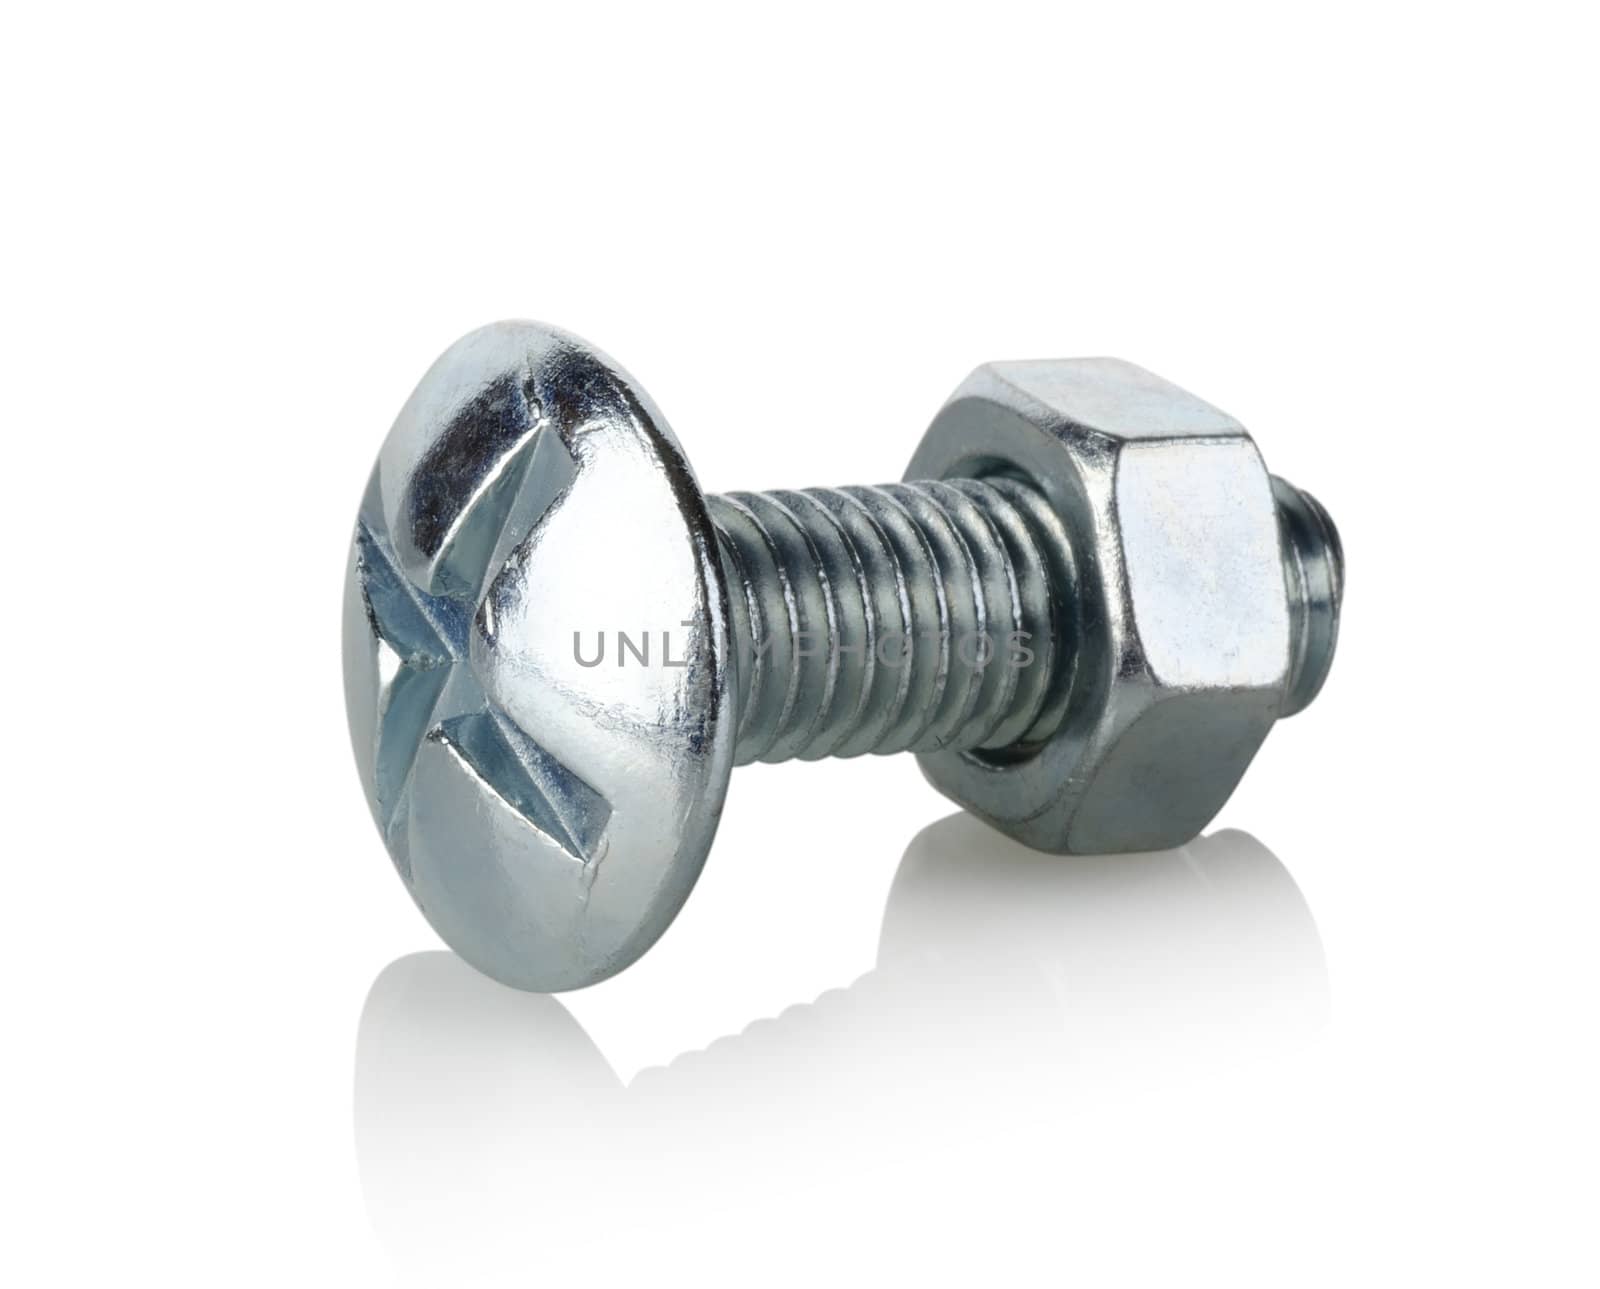 Screw and nut isolated on a white background